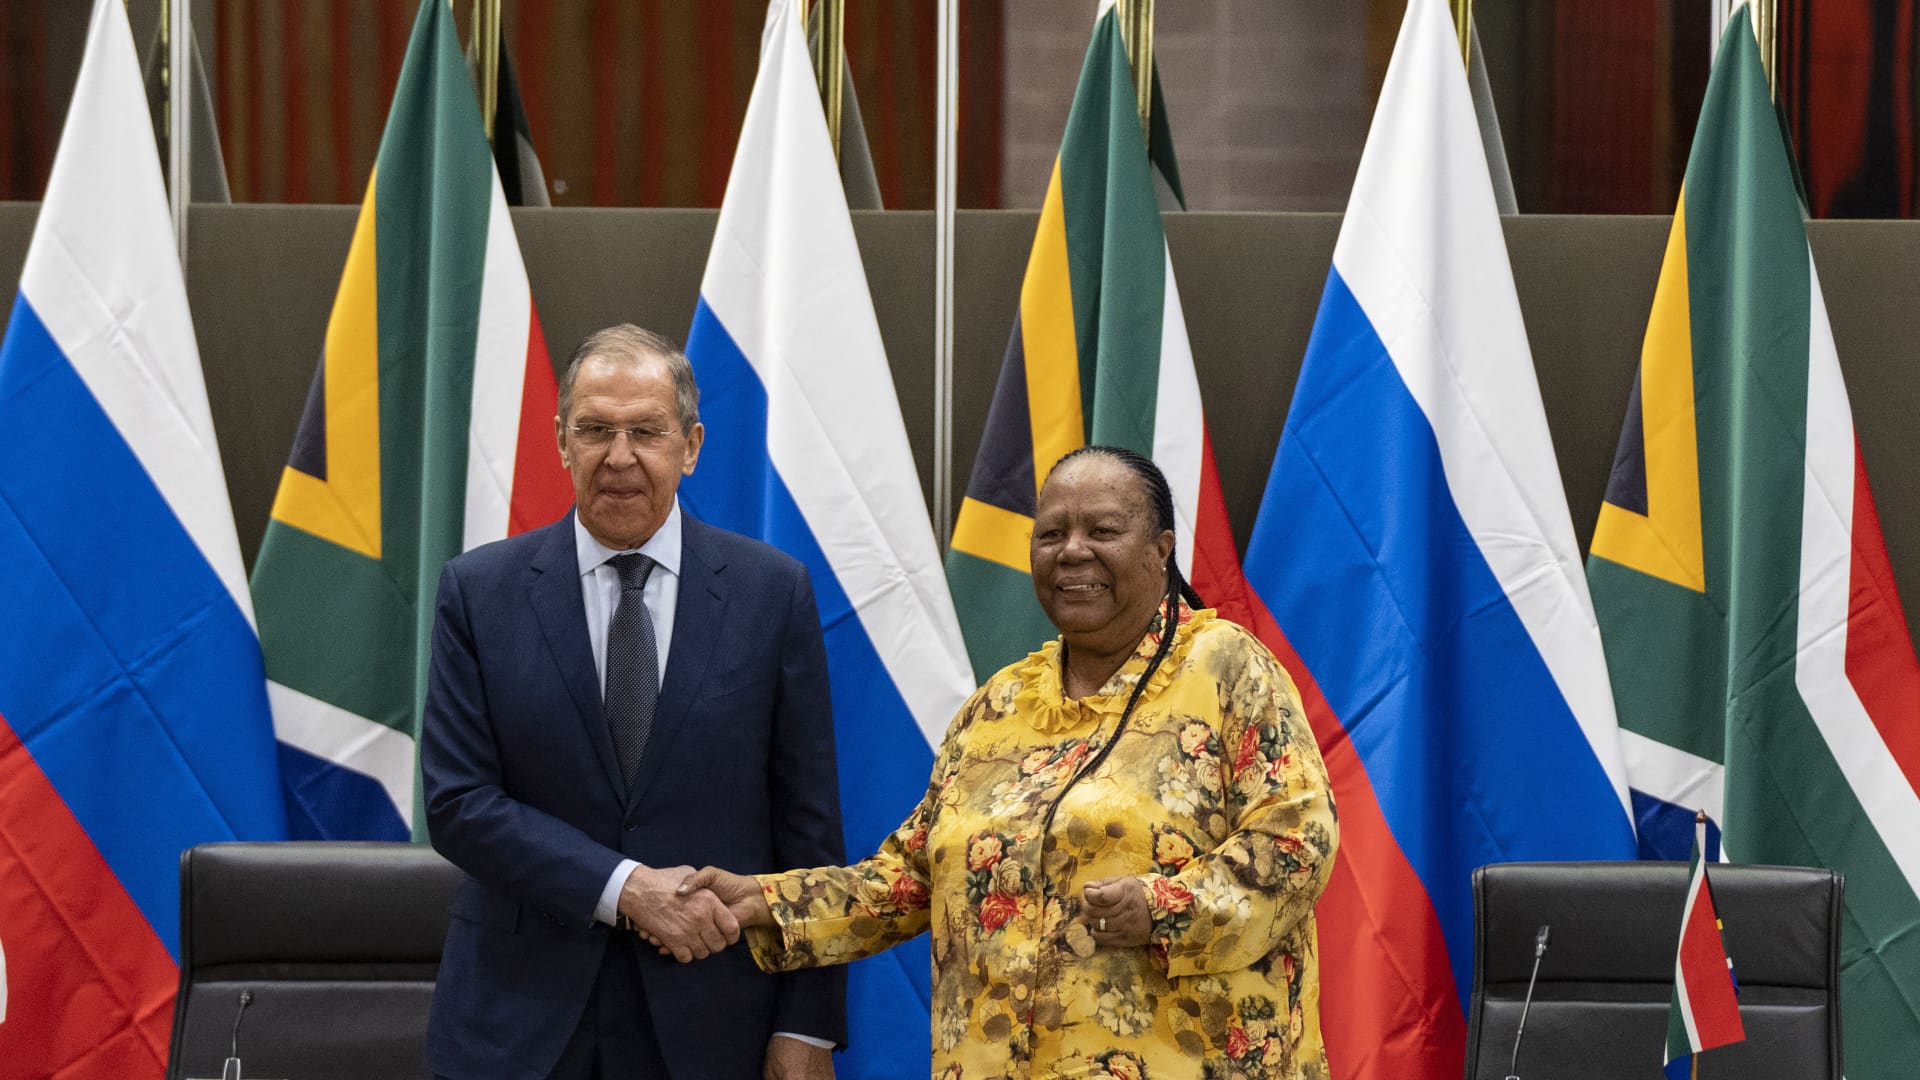 Russia, South Africa and a ‘redesigned global order’